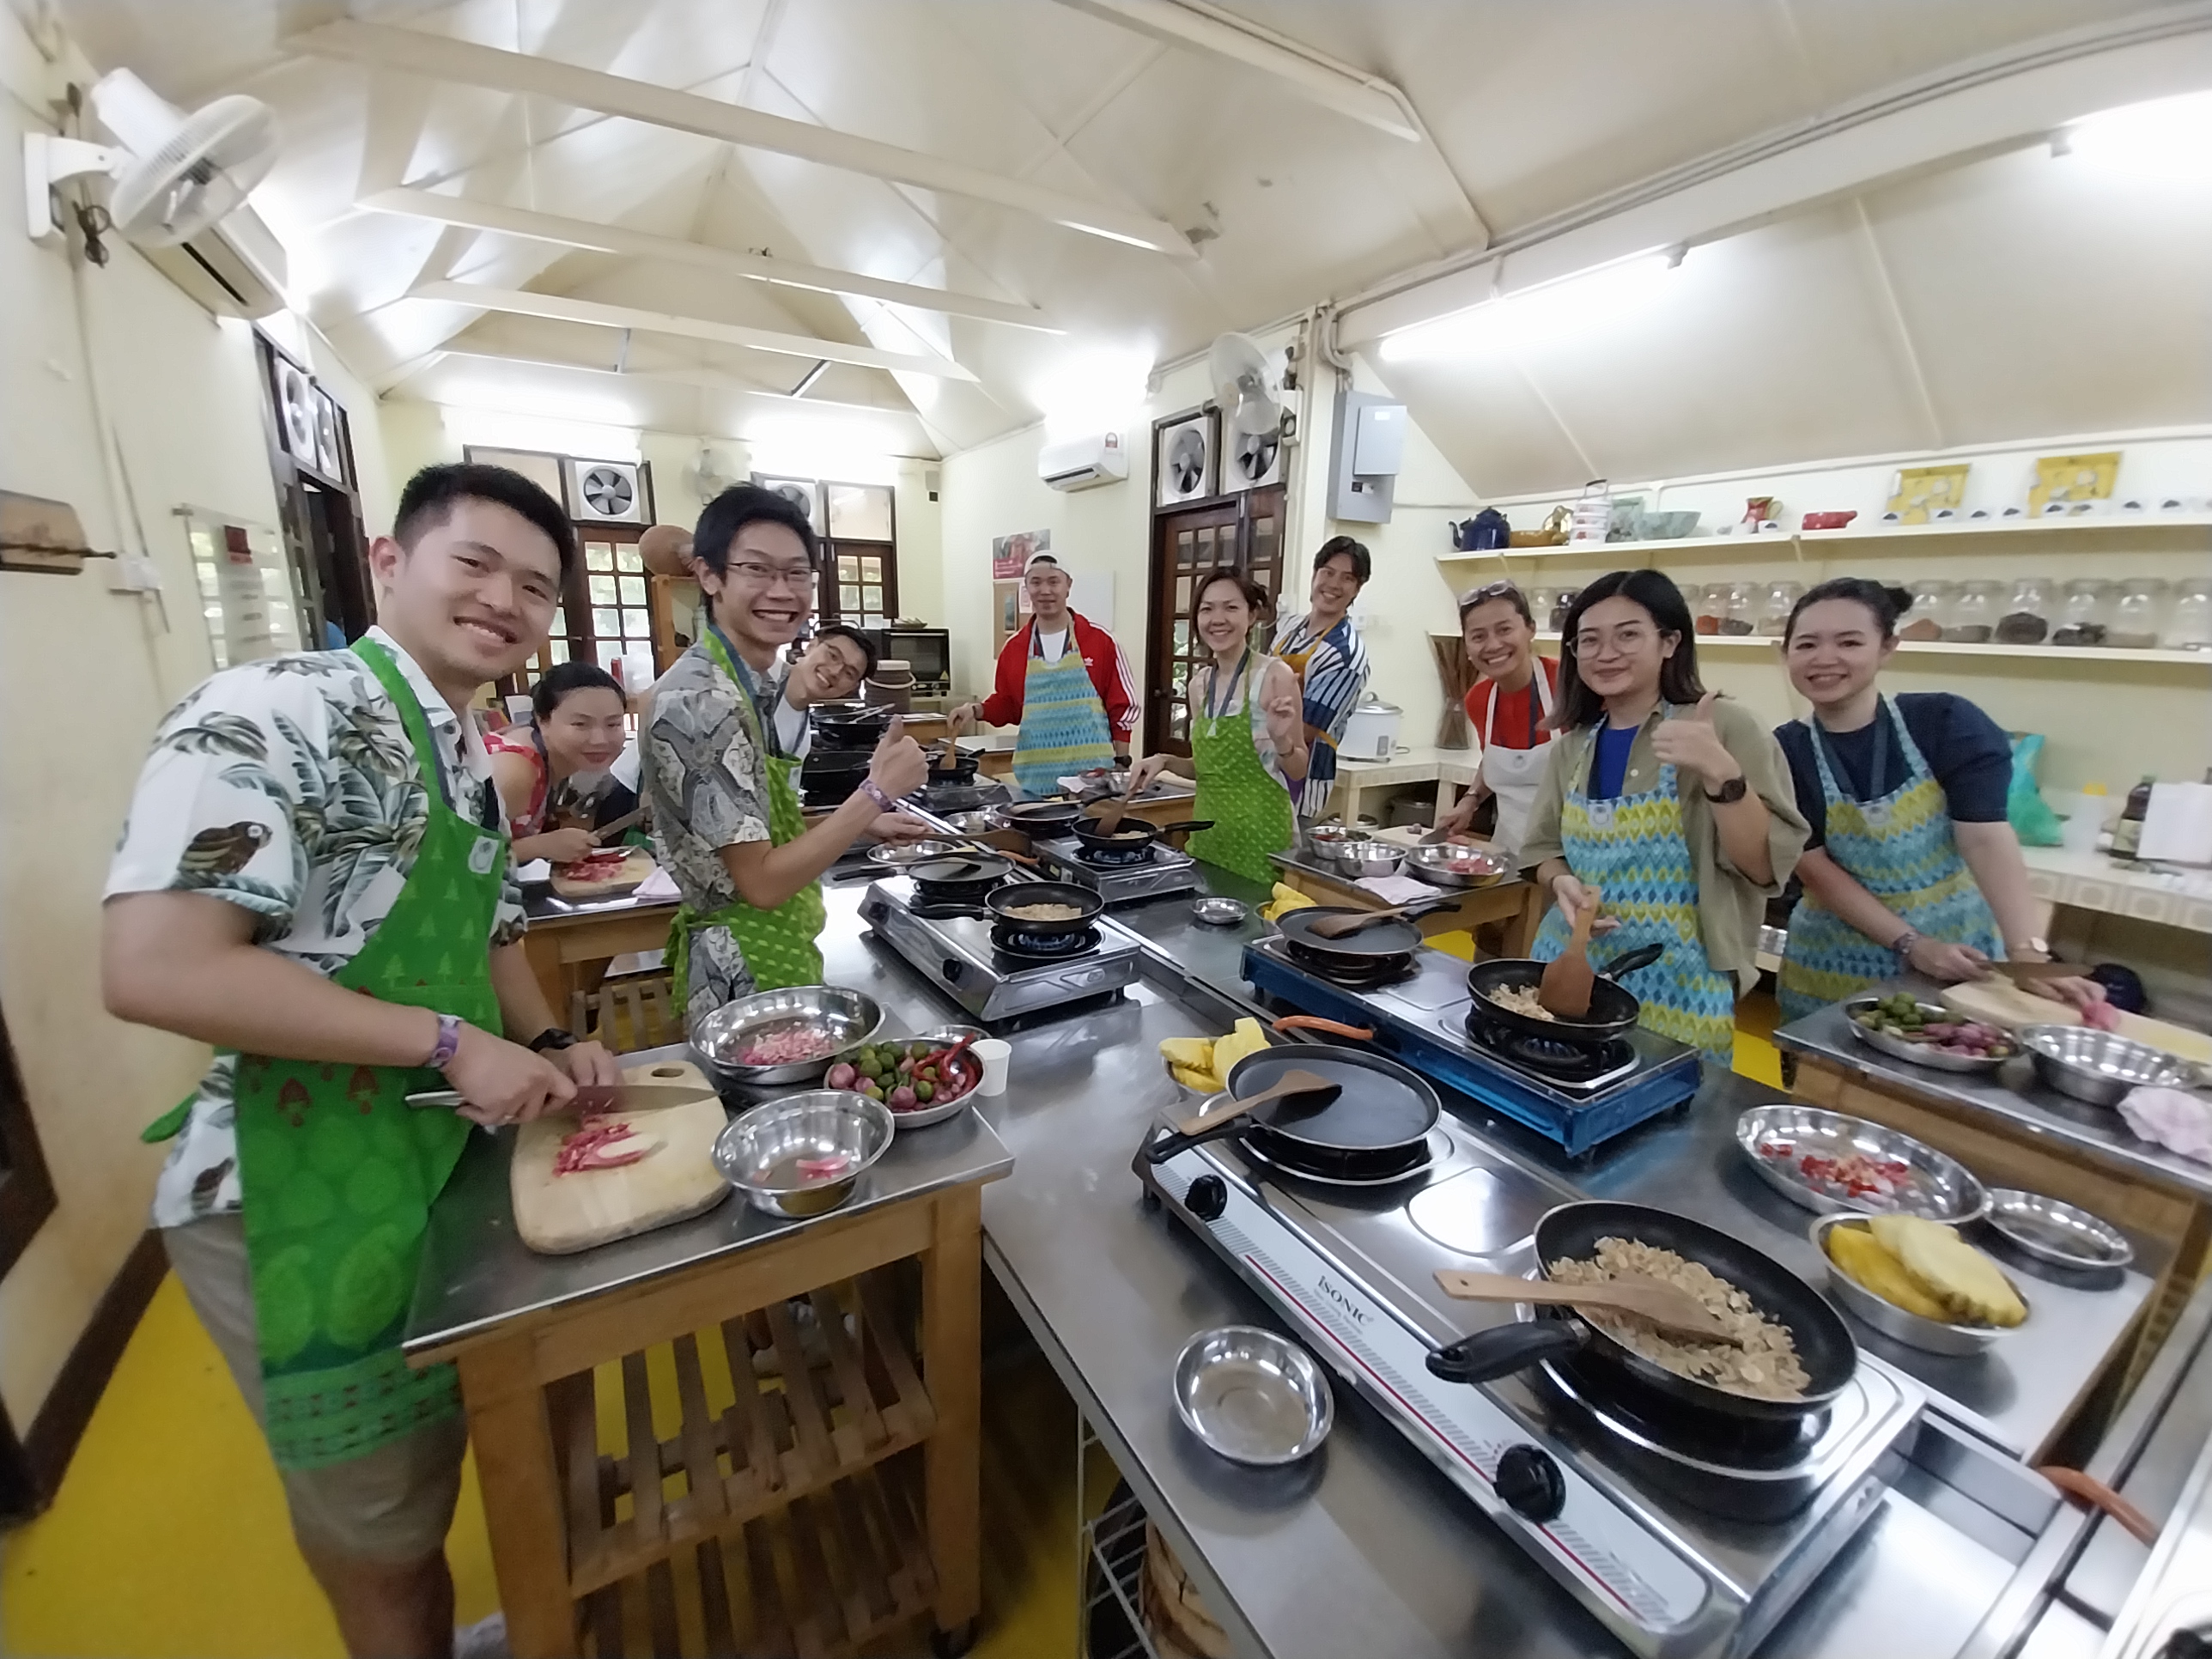 learning how to cook at Tropical spice garden in Penang